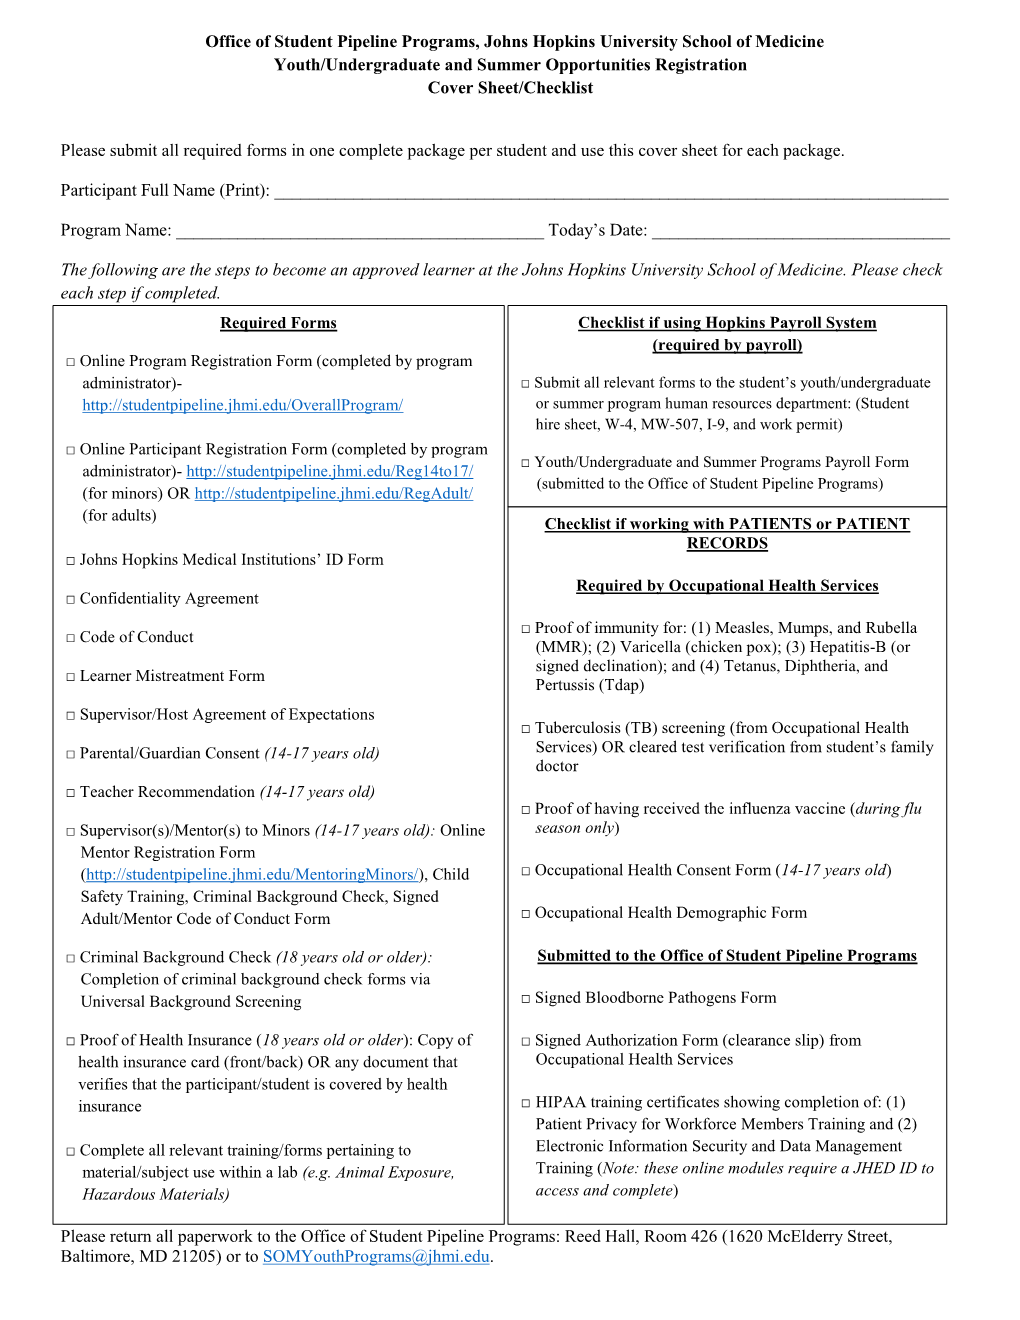 Office of Student Pipeline Programs, Johns Hopkins University School of Medicine Youth/Undergraduate and Summer Opportunities Registration Cover Sheet/Checklist